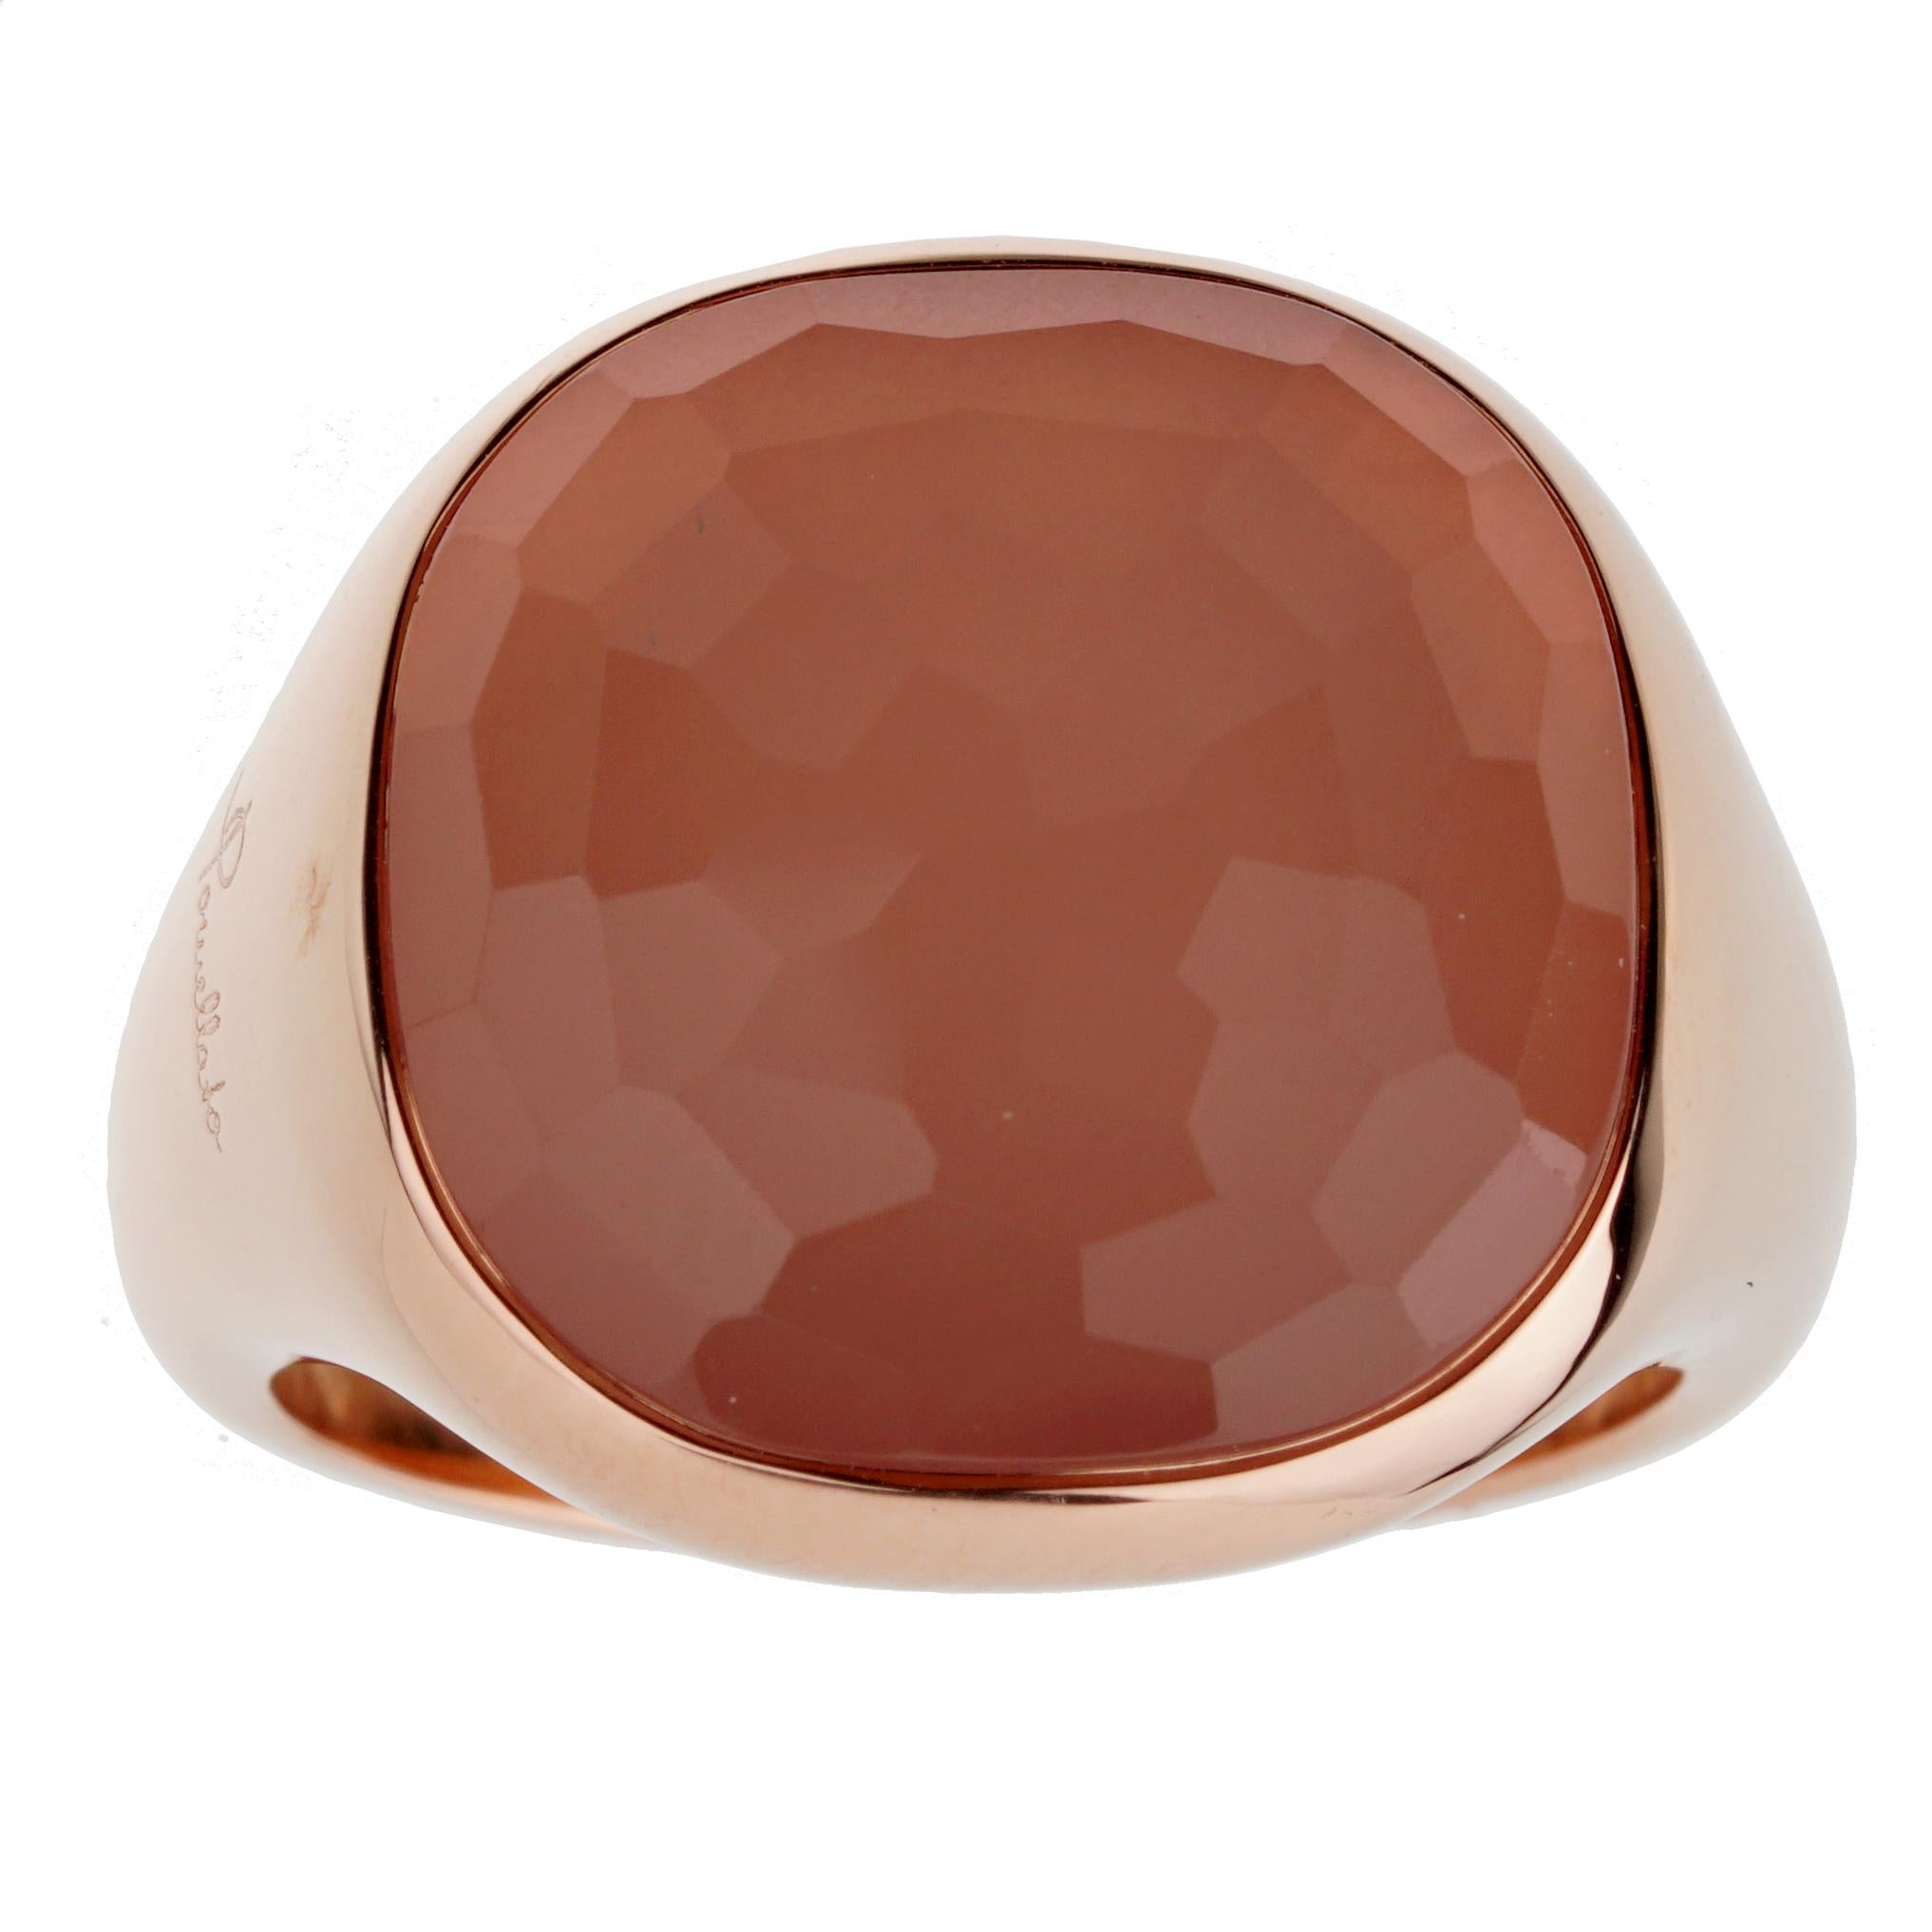 Pomellato Rose Gold Pink Quartz Cocktail Ring In Excellent Condition For Sale In Feasterville, PA